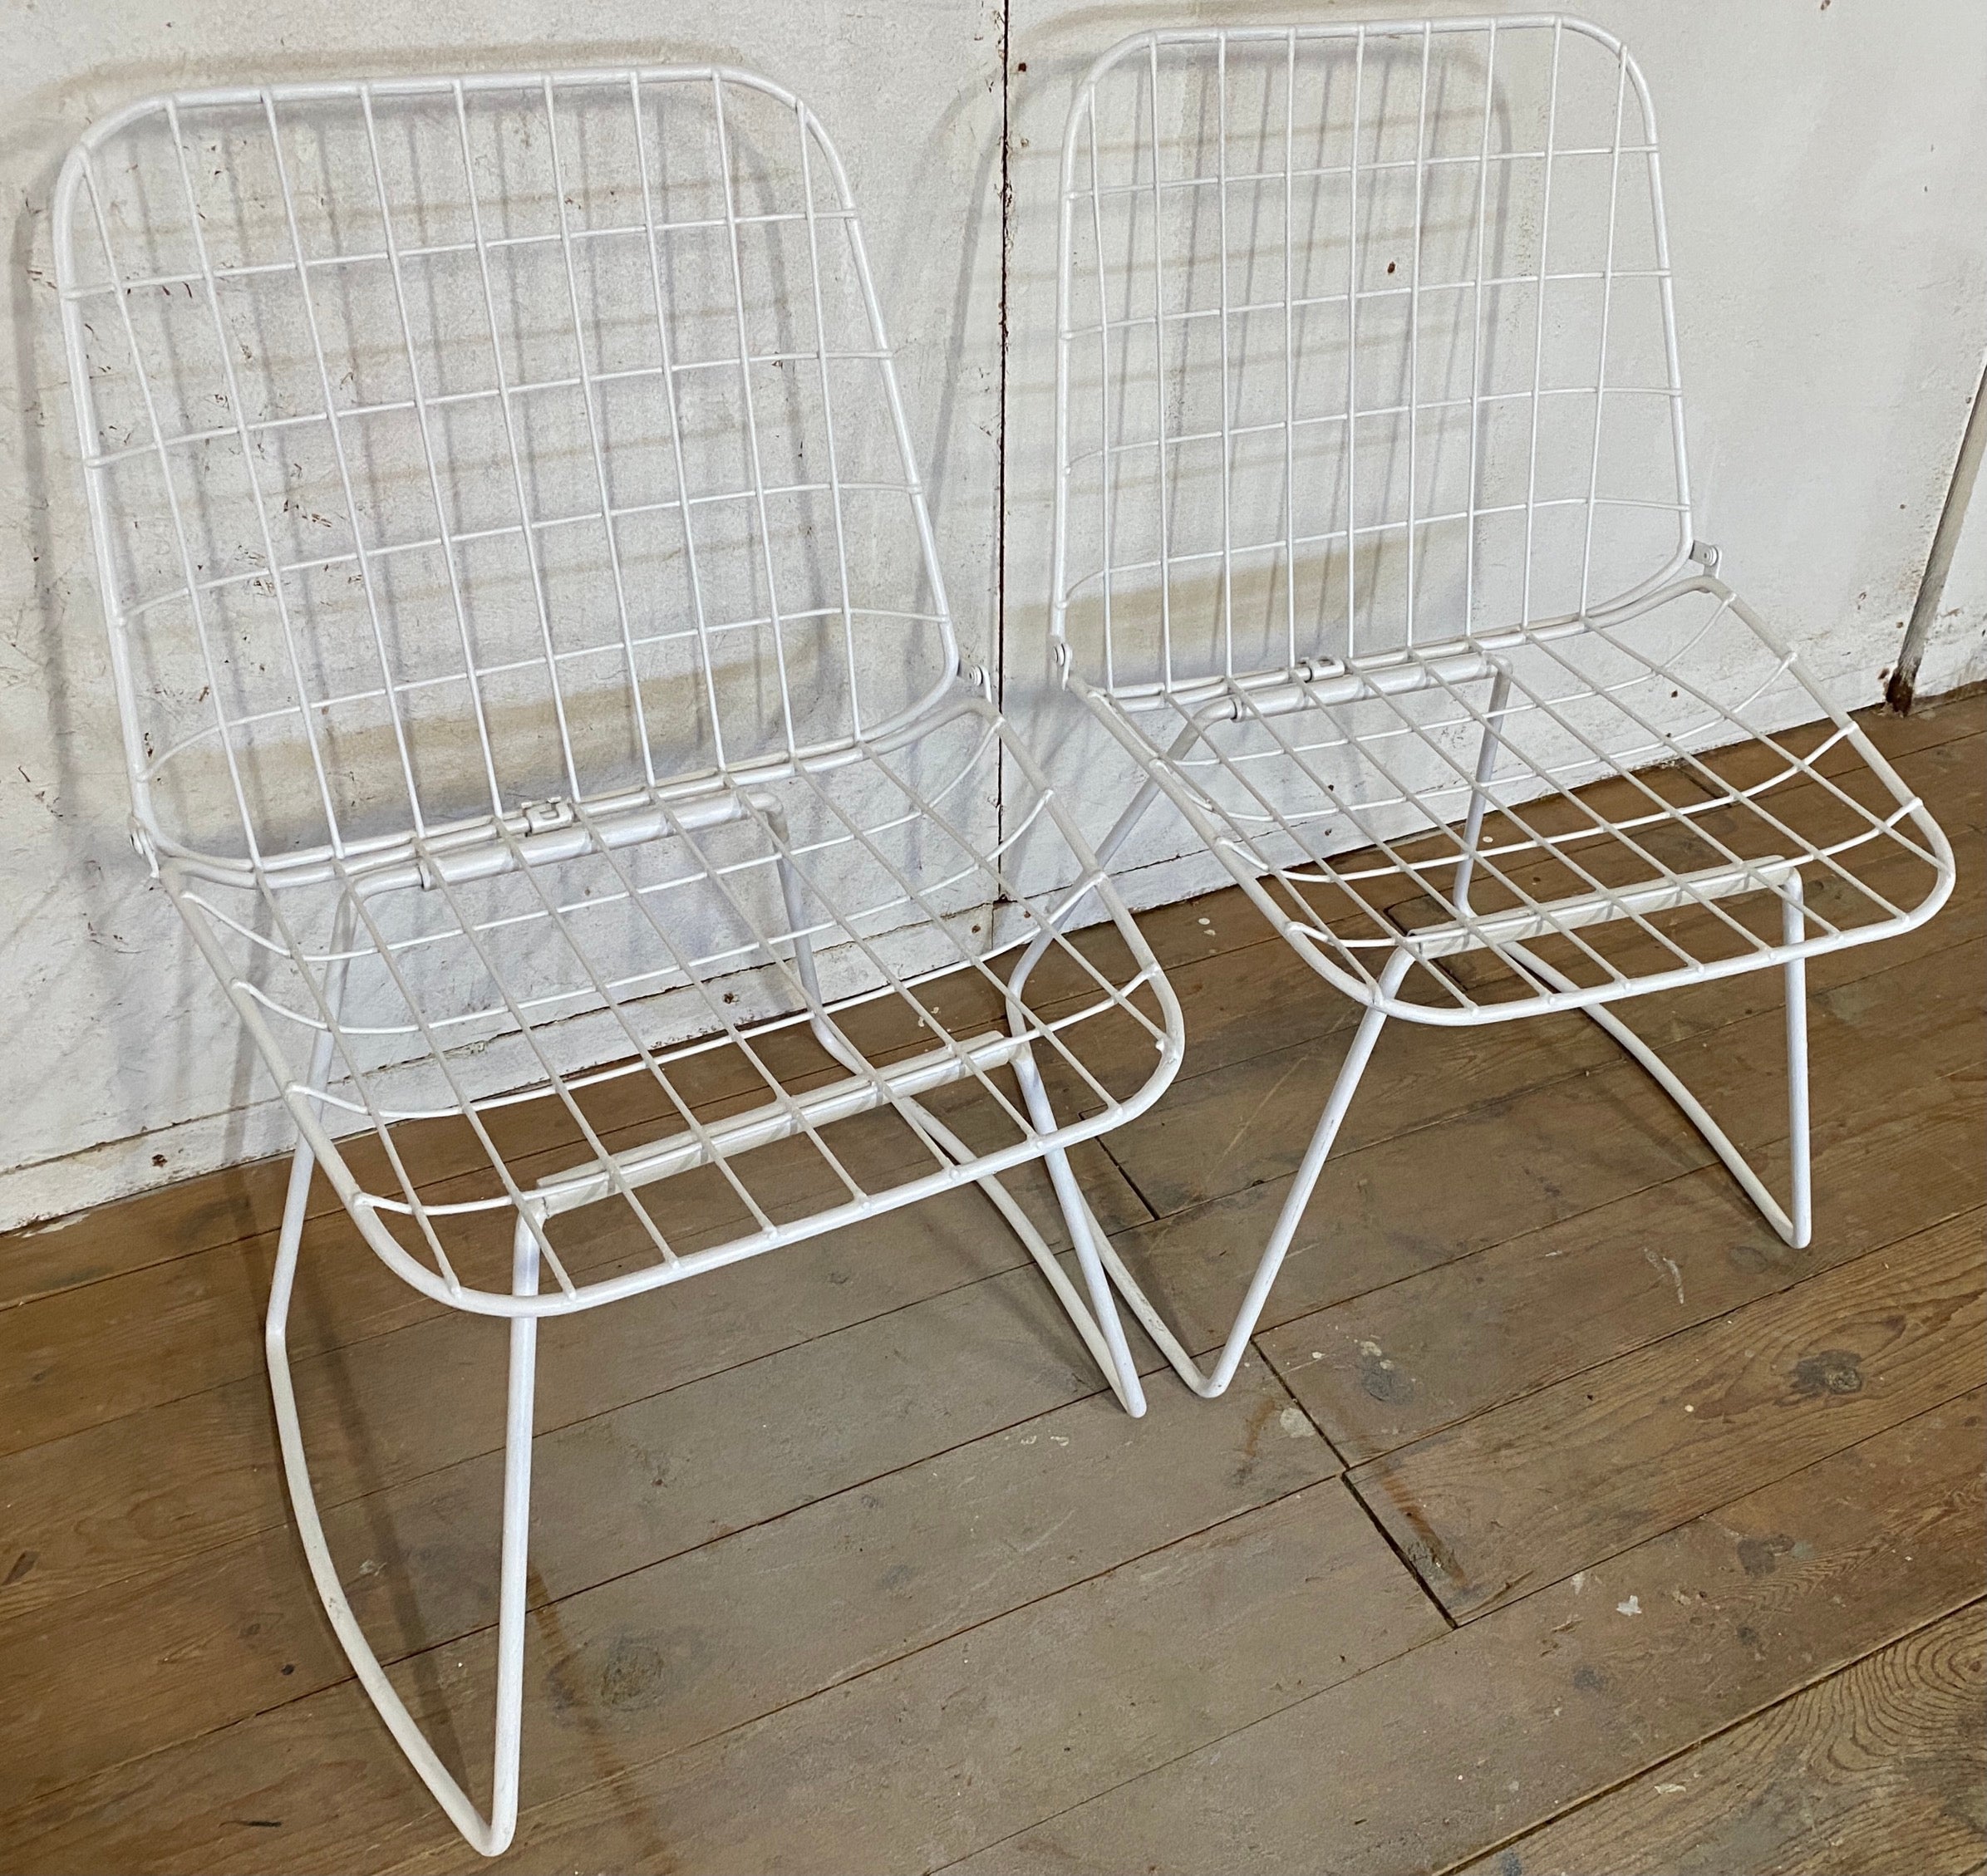 Pair of classic vintage modern industrial Harry Bertoia style metal wire side chairs.
Use them for office chairs, dining chairs or extra chairs where needed.